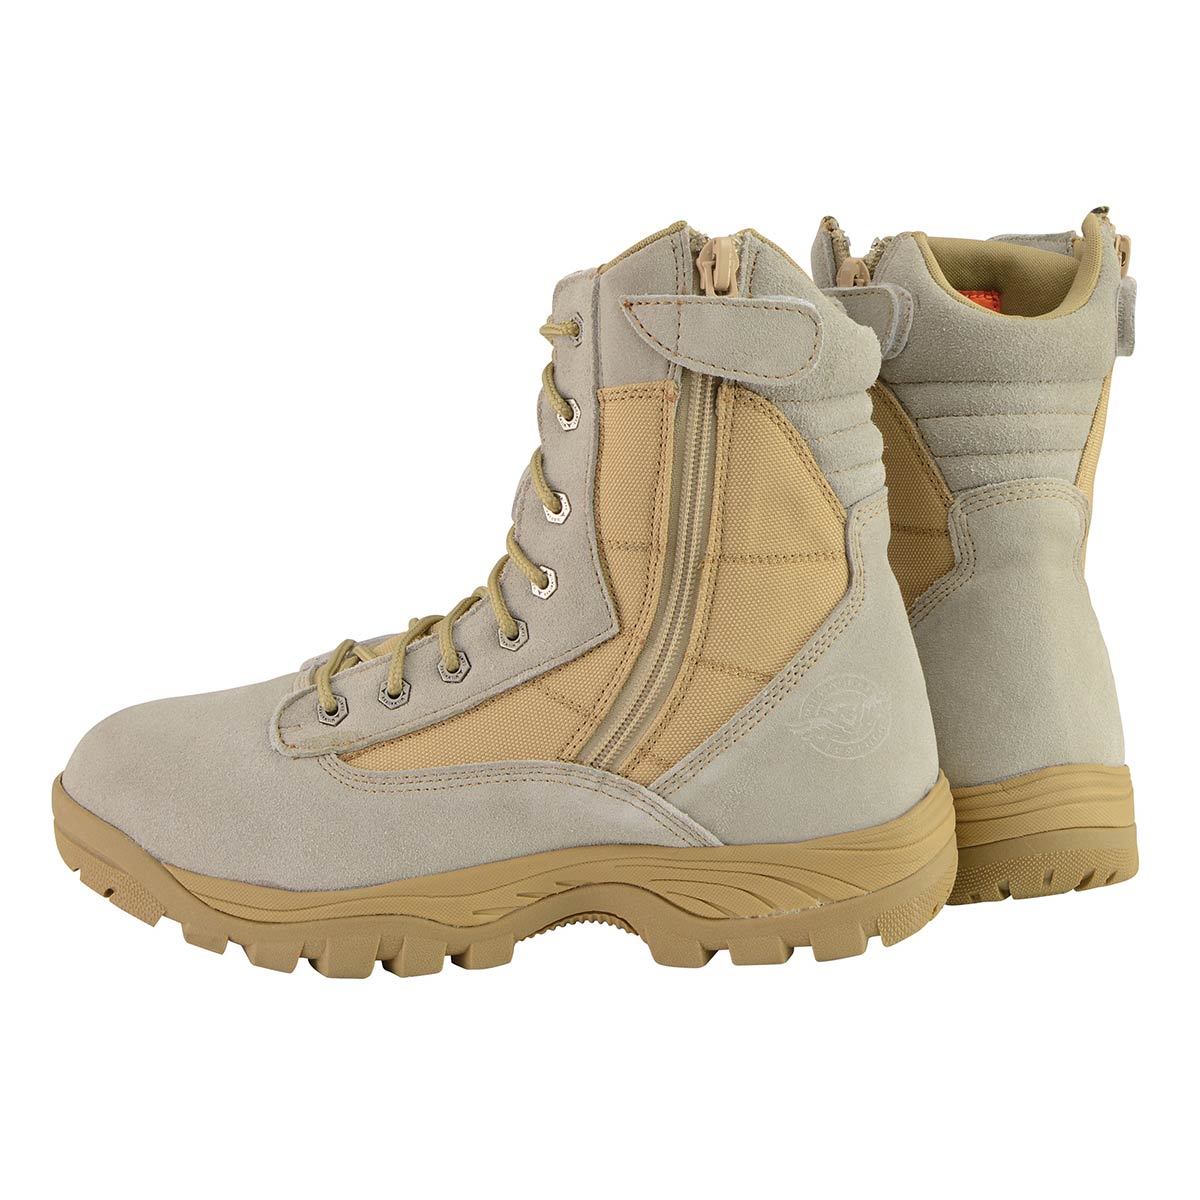 Milwaukee Leather MBM9111 Men's Lace-Up Desert Sand 9-Inch Leather Tactical Boots with Side Zippers